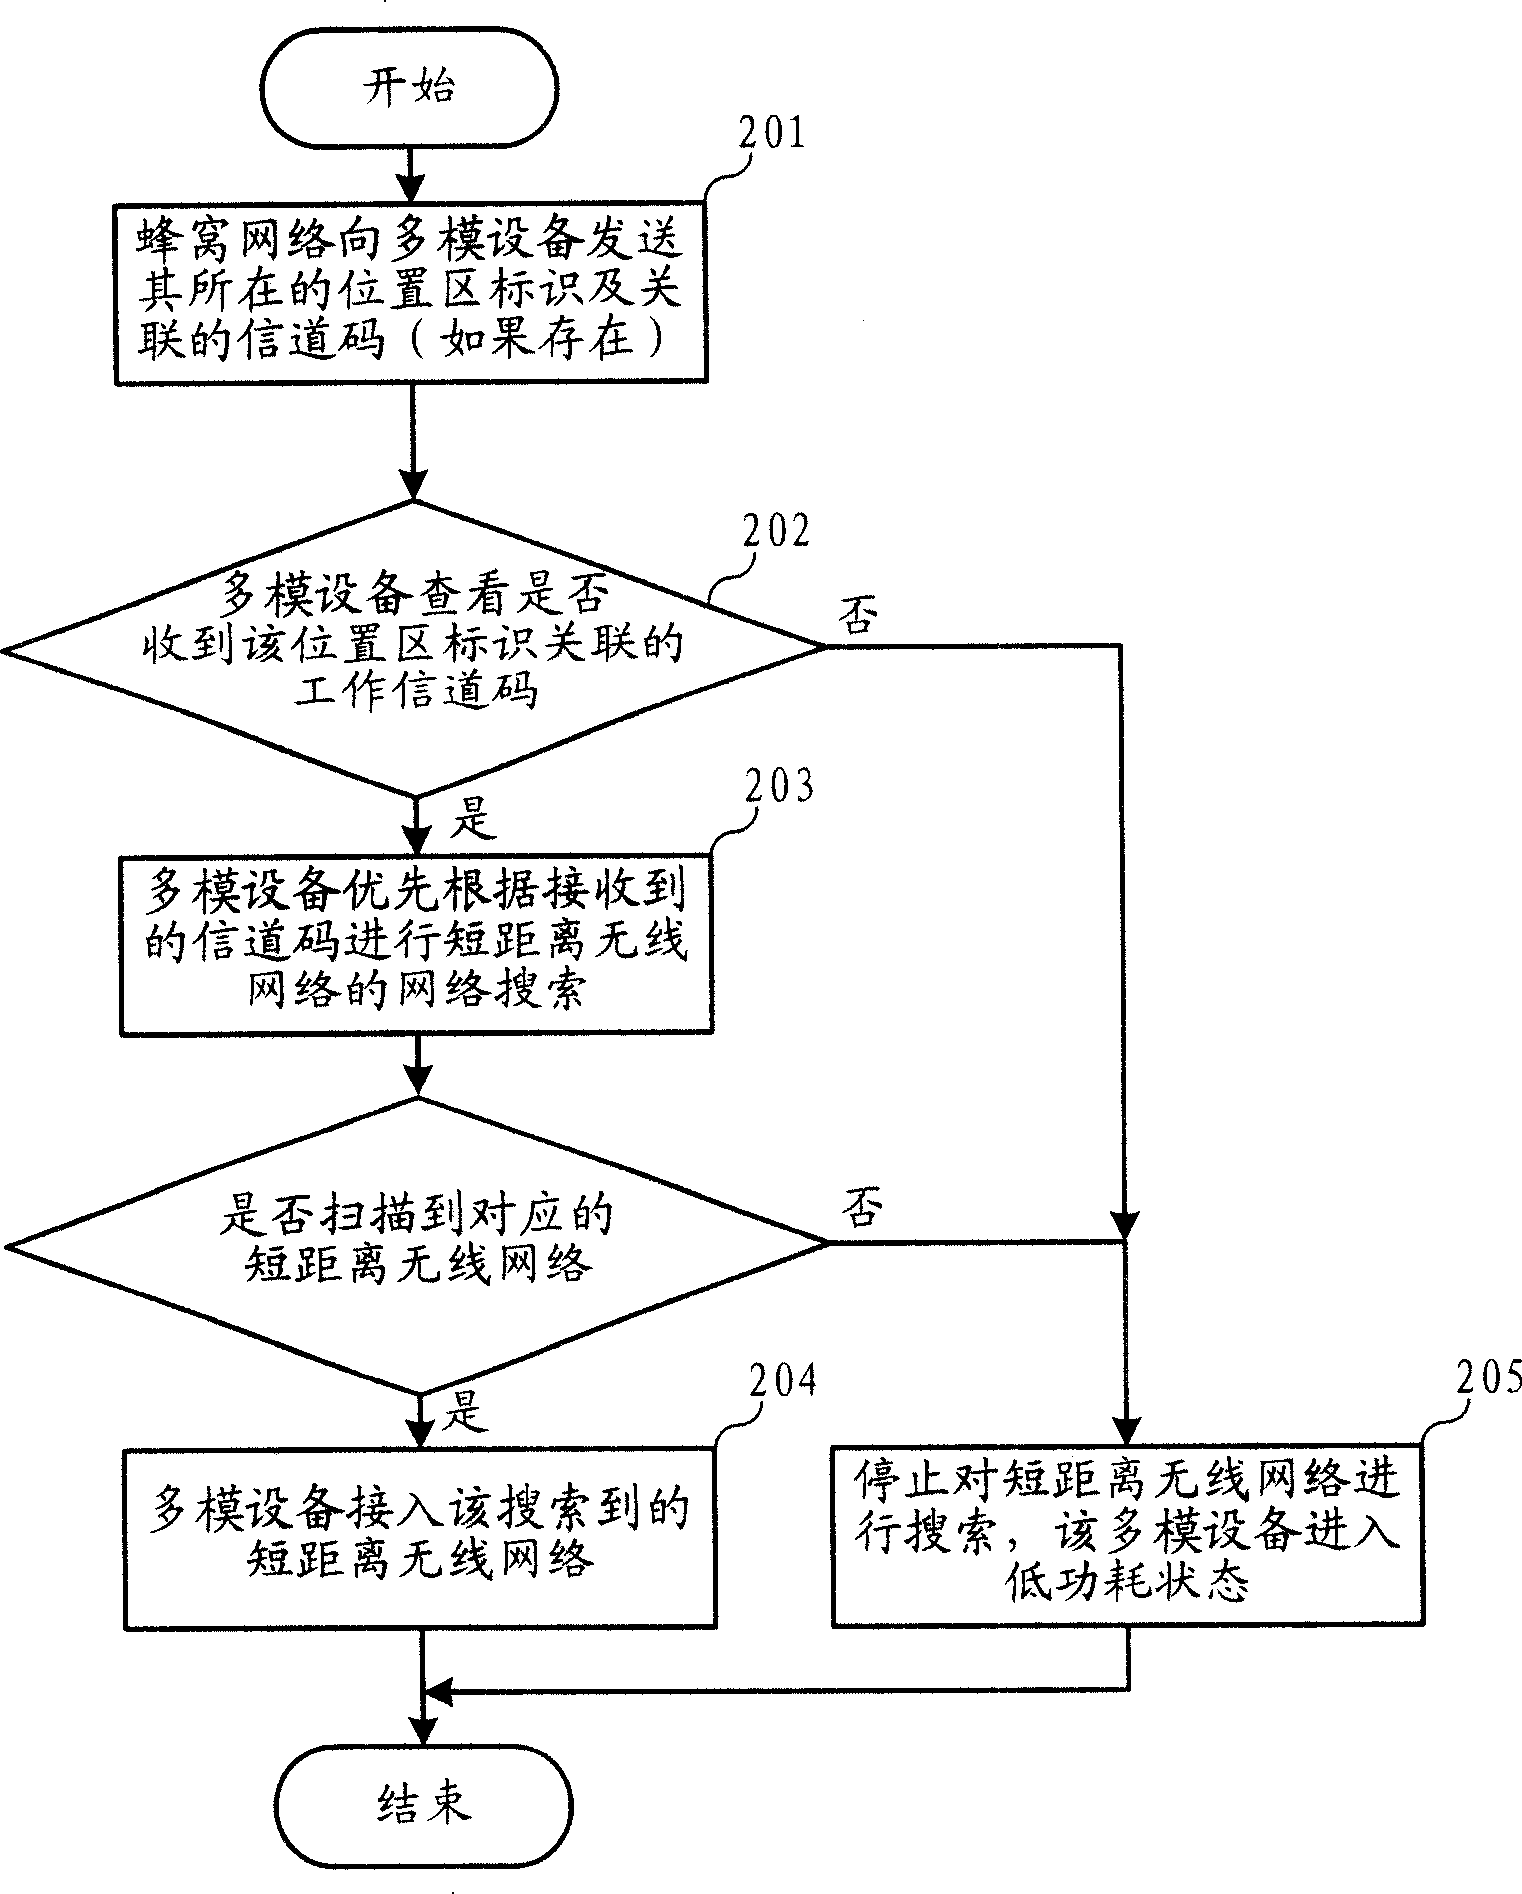 Method and system for searching wireless network and multi-mode equipment